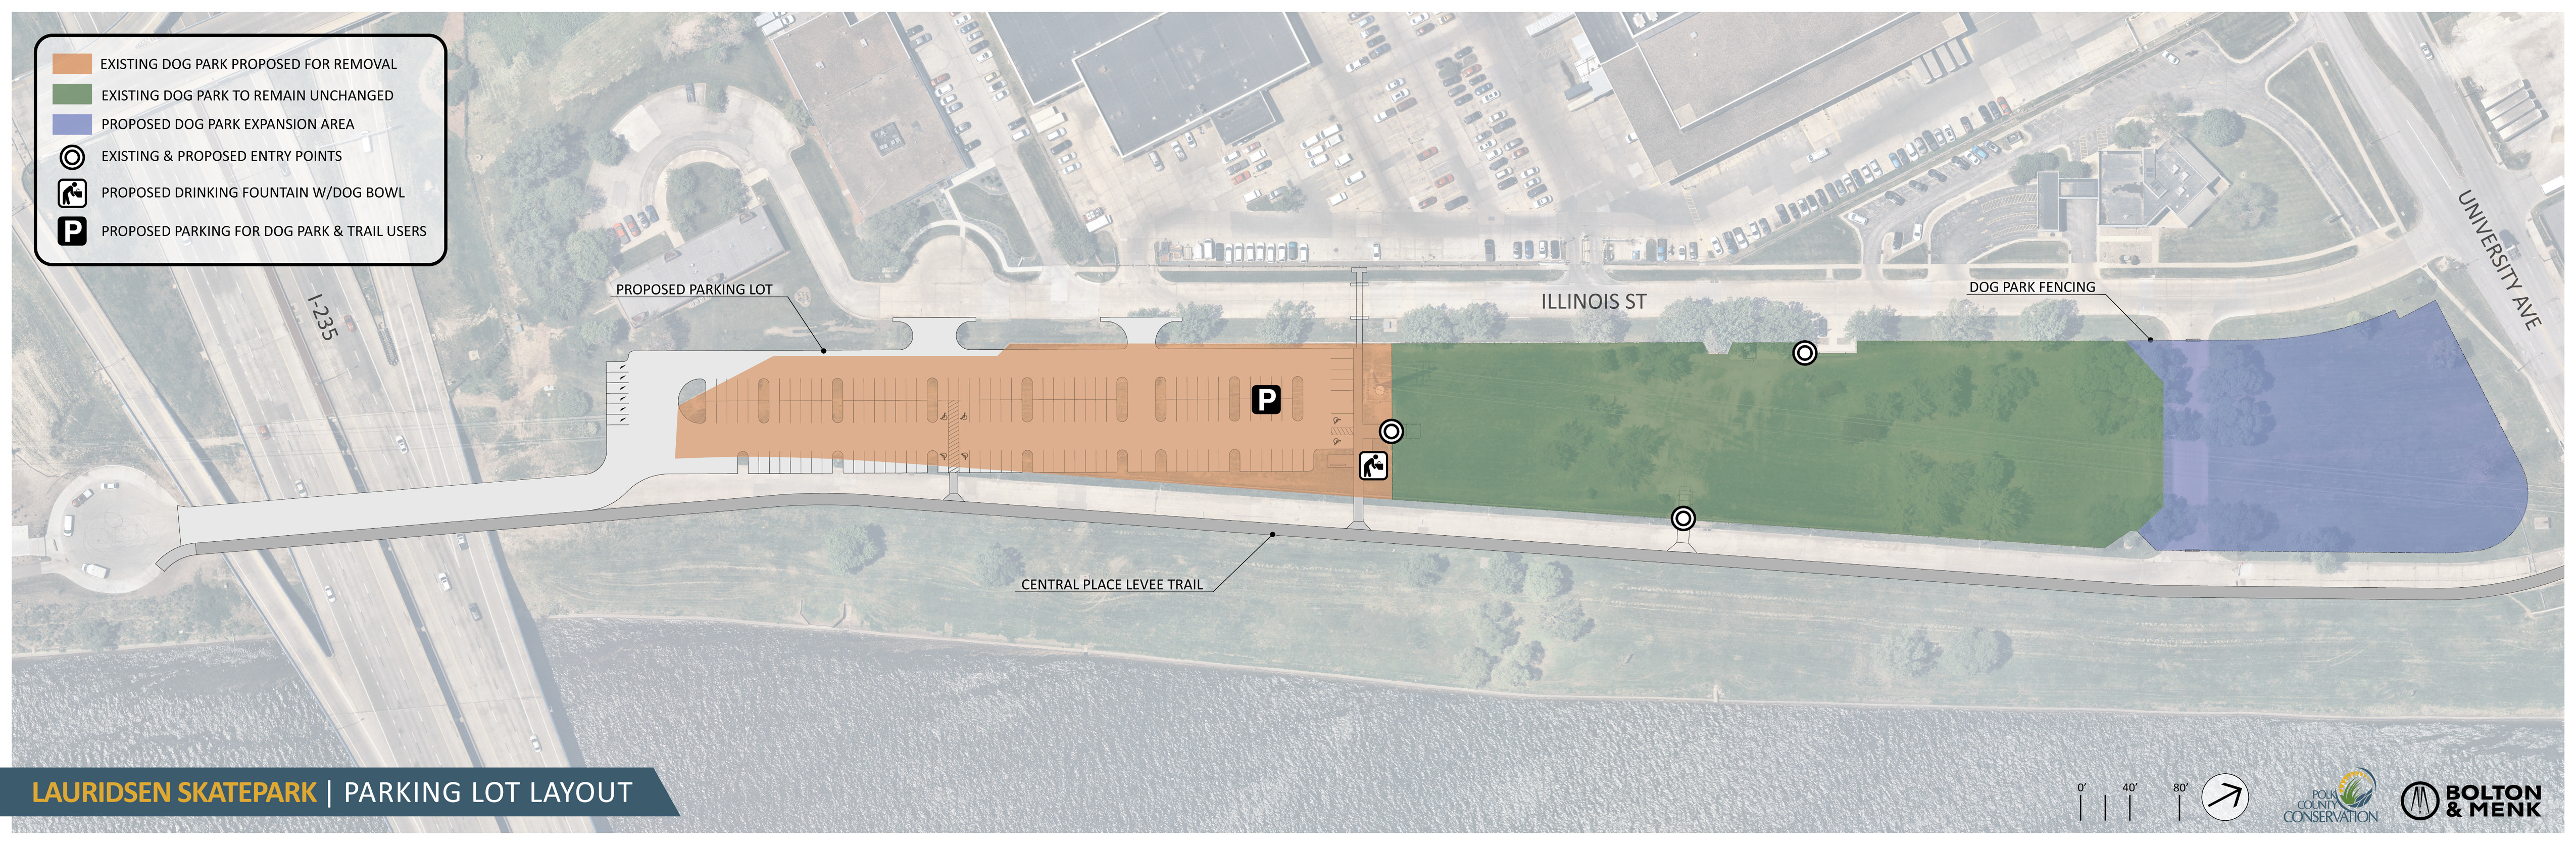 Image of proposed parking lot and changes to dogpark.